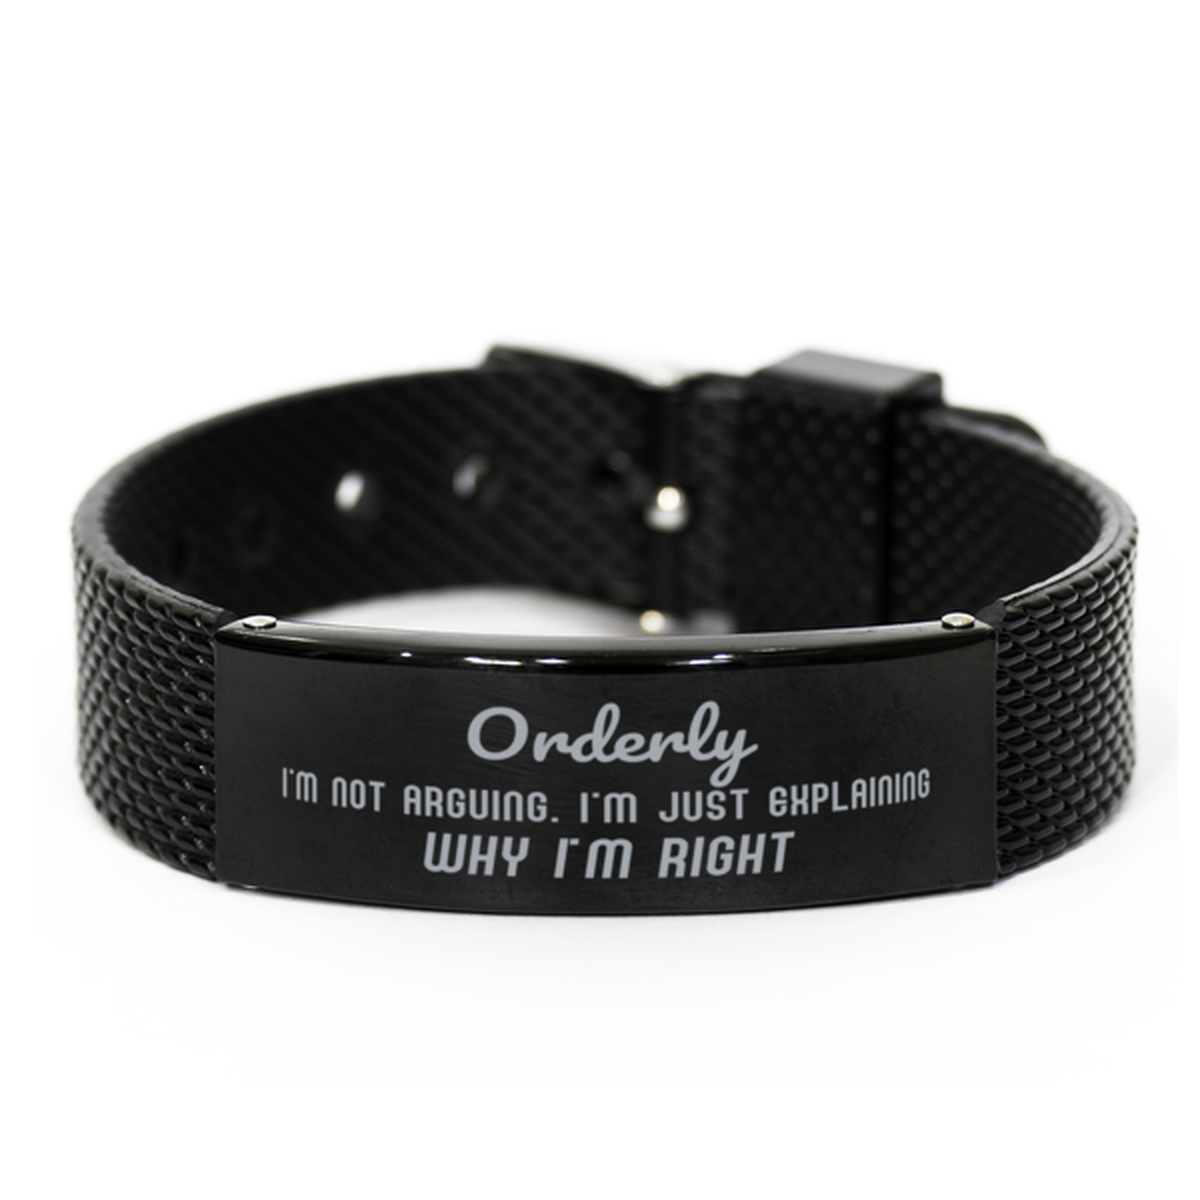 Orderly I'm not Arguing. I'm Just Explaining Why I'm RIGHT Black Shark Mesh Bracelet, Funny Saying Quote Orderly Gifts For Orderly Graduation Birthday Christmas Gifts for Men Women Coworker